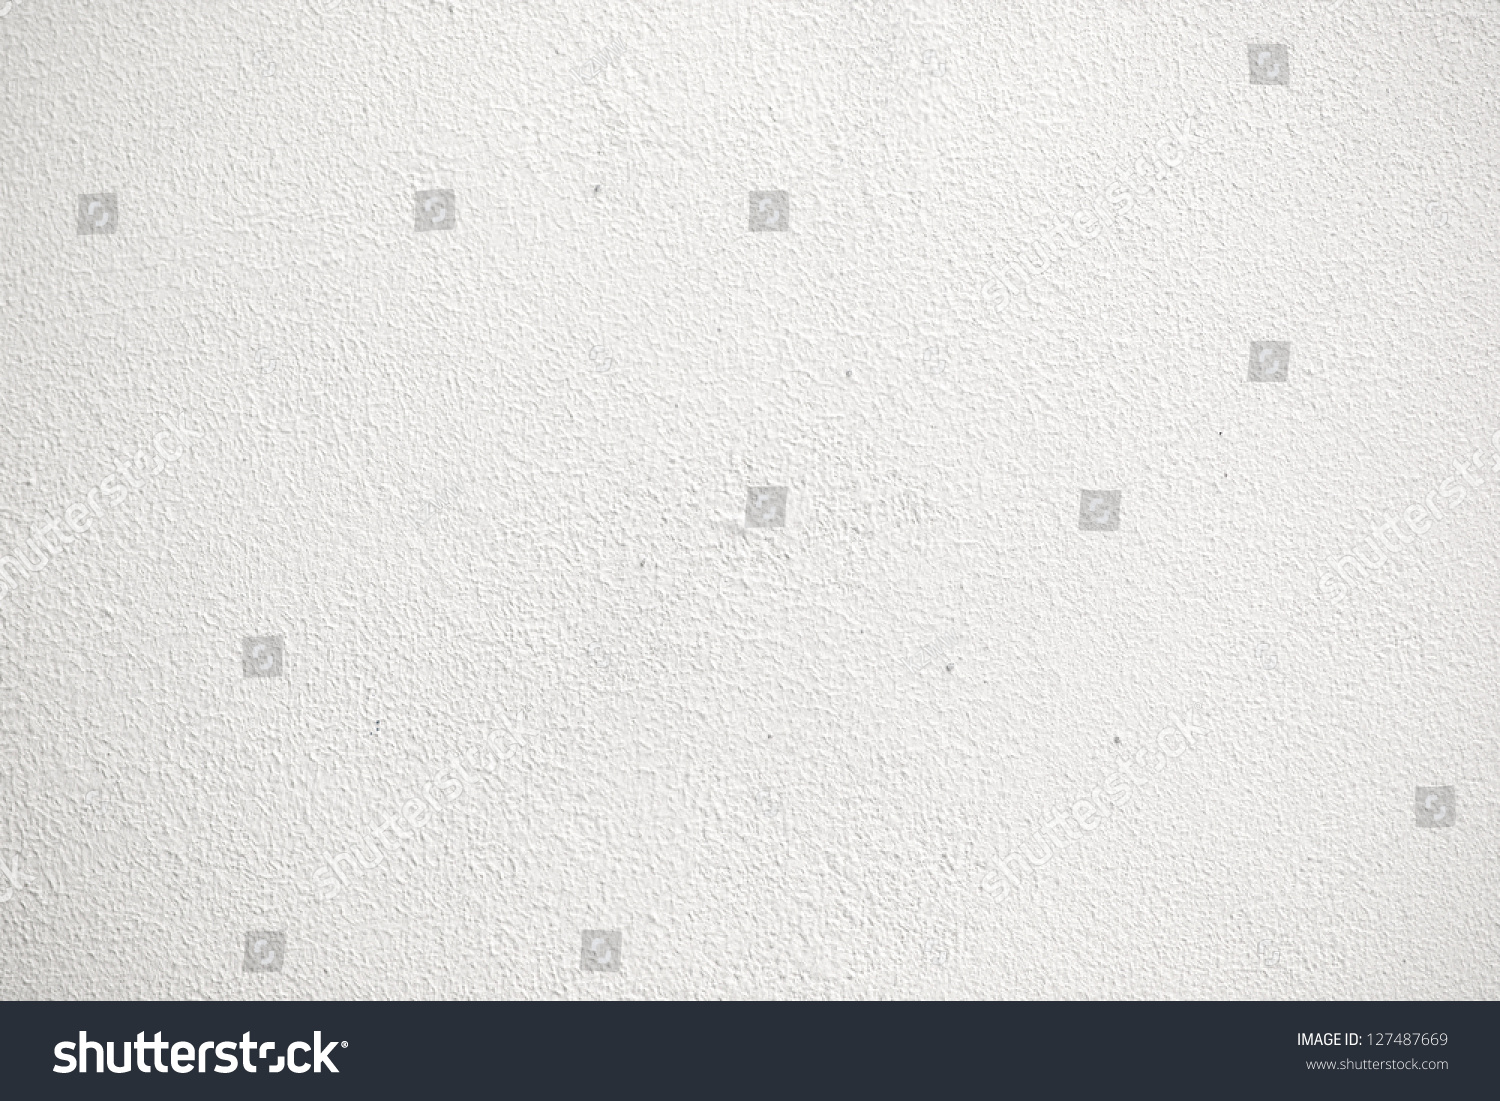 2,991,286 White stone wall texture Images, Stock Photos & Vectors ...